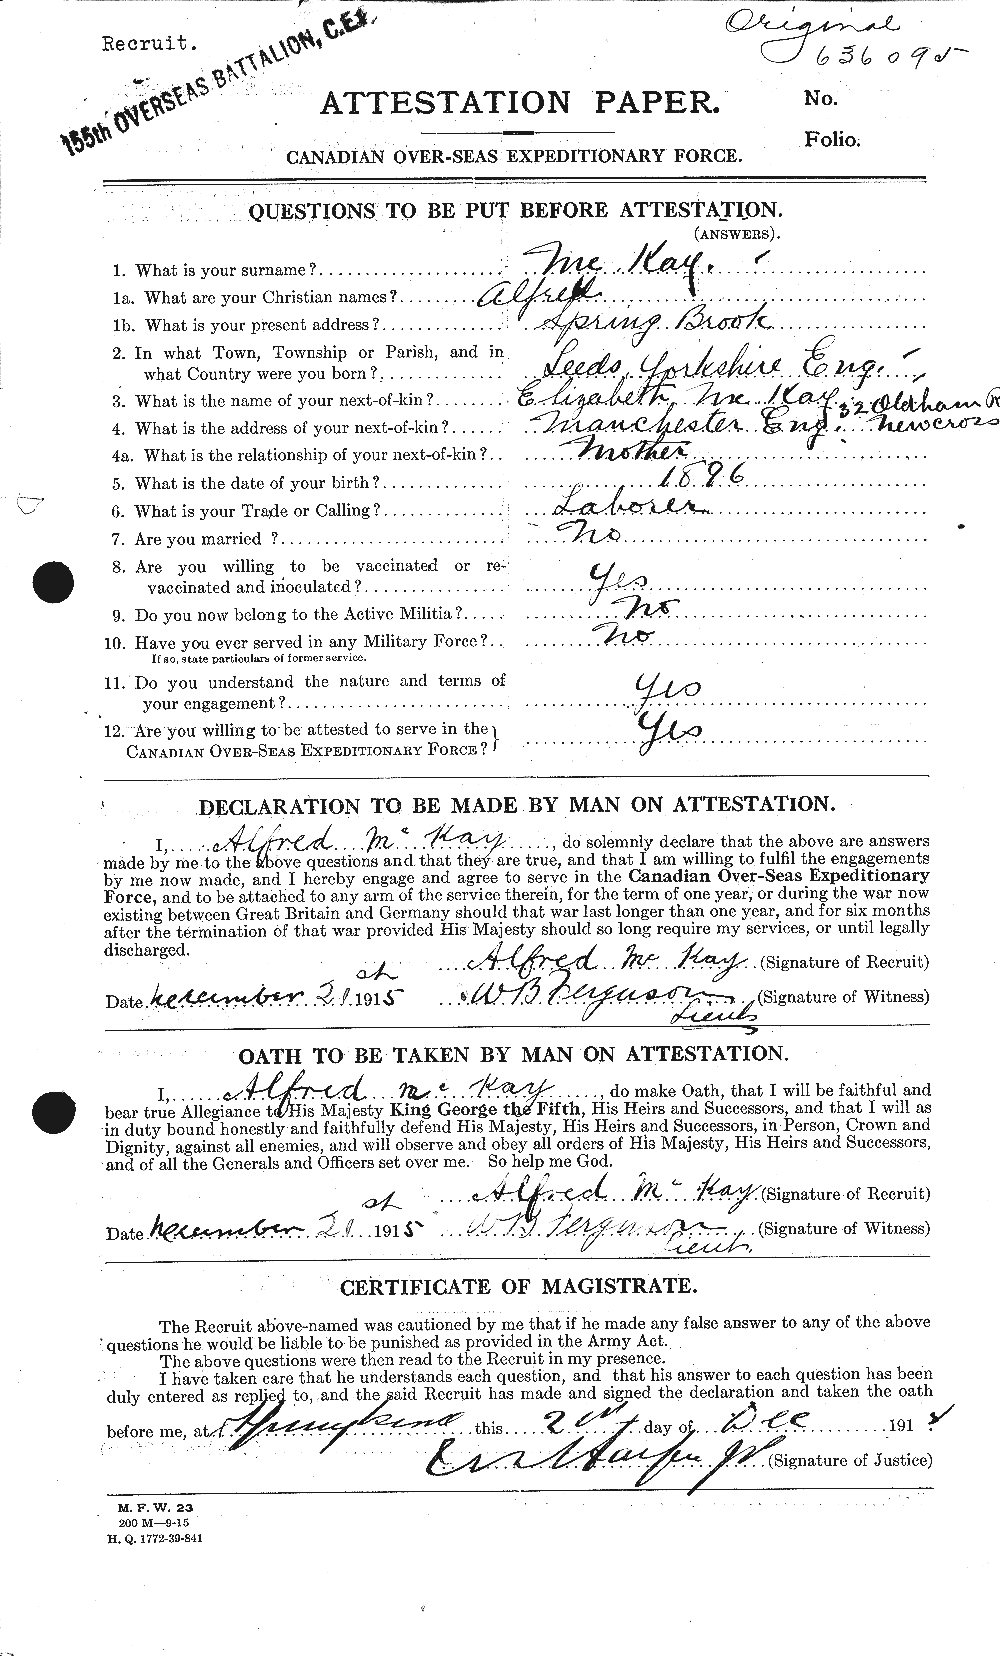 Personnel Records of the First World War - CEF 530956a